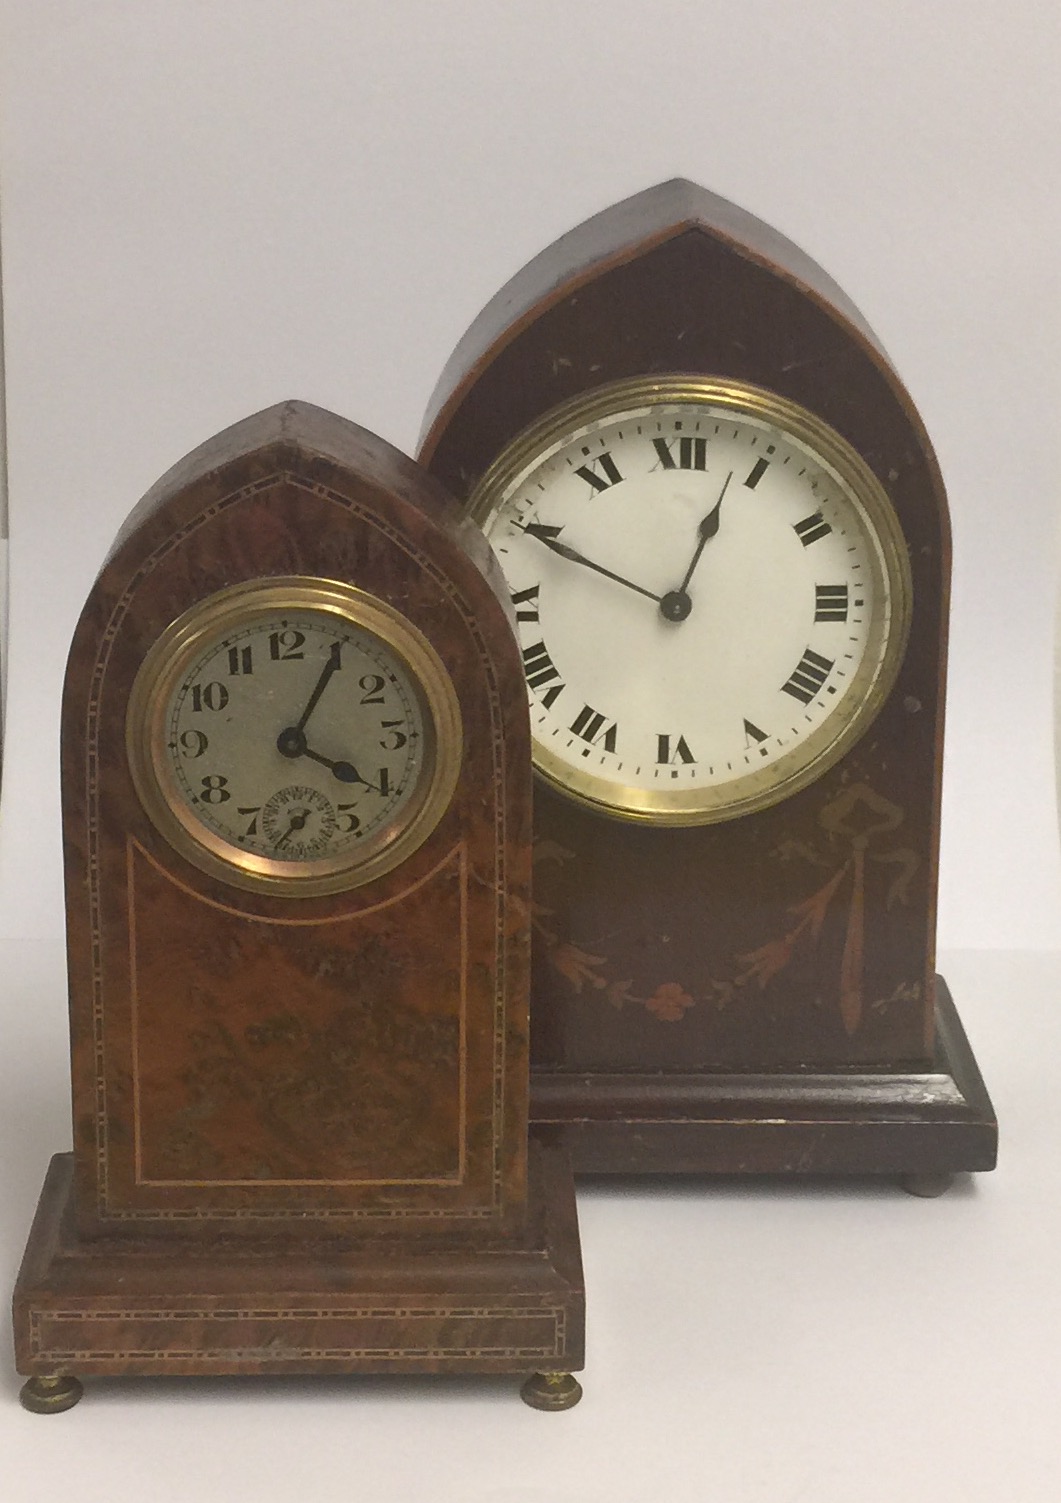 A LATE 19TH CENTURY AMBOYNA CASED CLOCK OF GOTHIC DESIGN Along with a mahogany and inlaid clock of